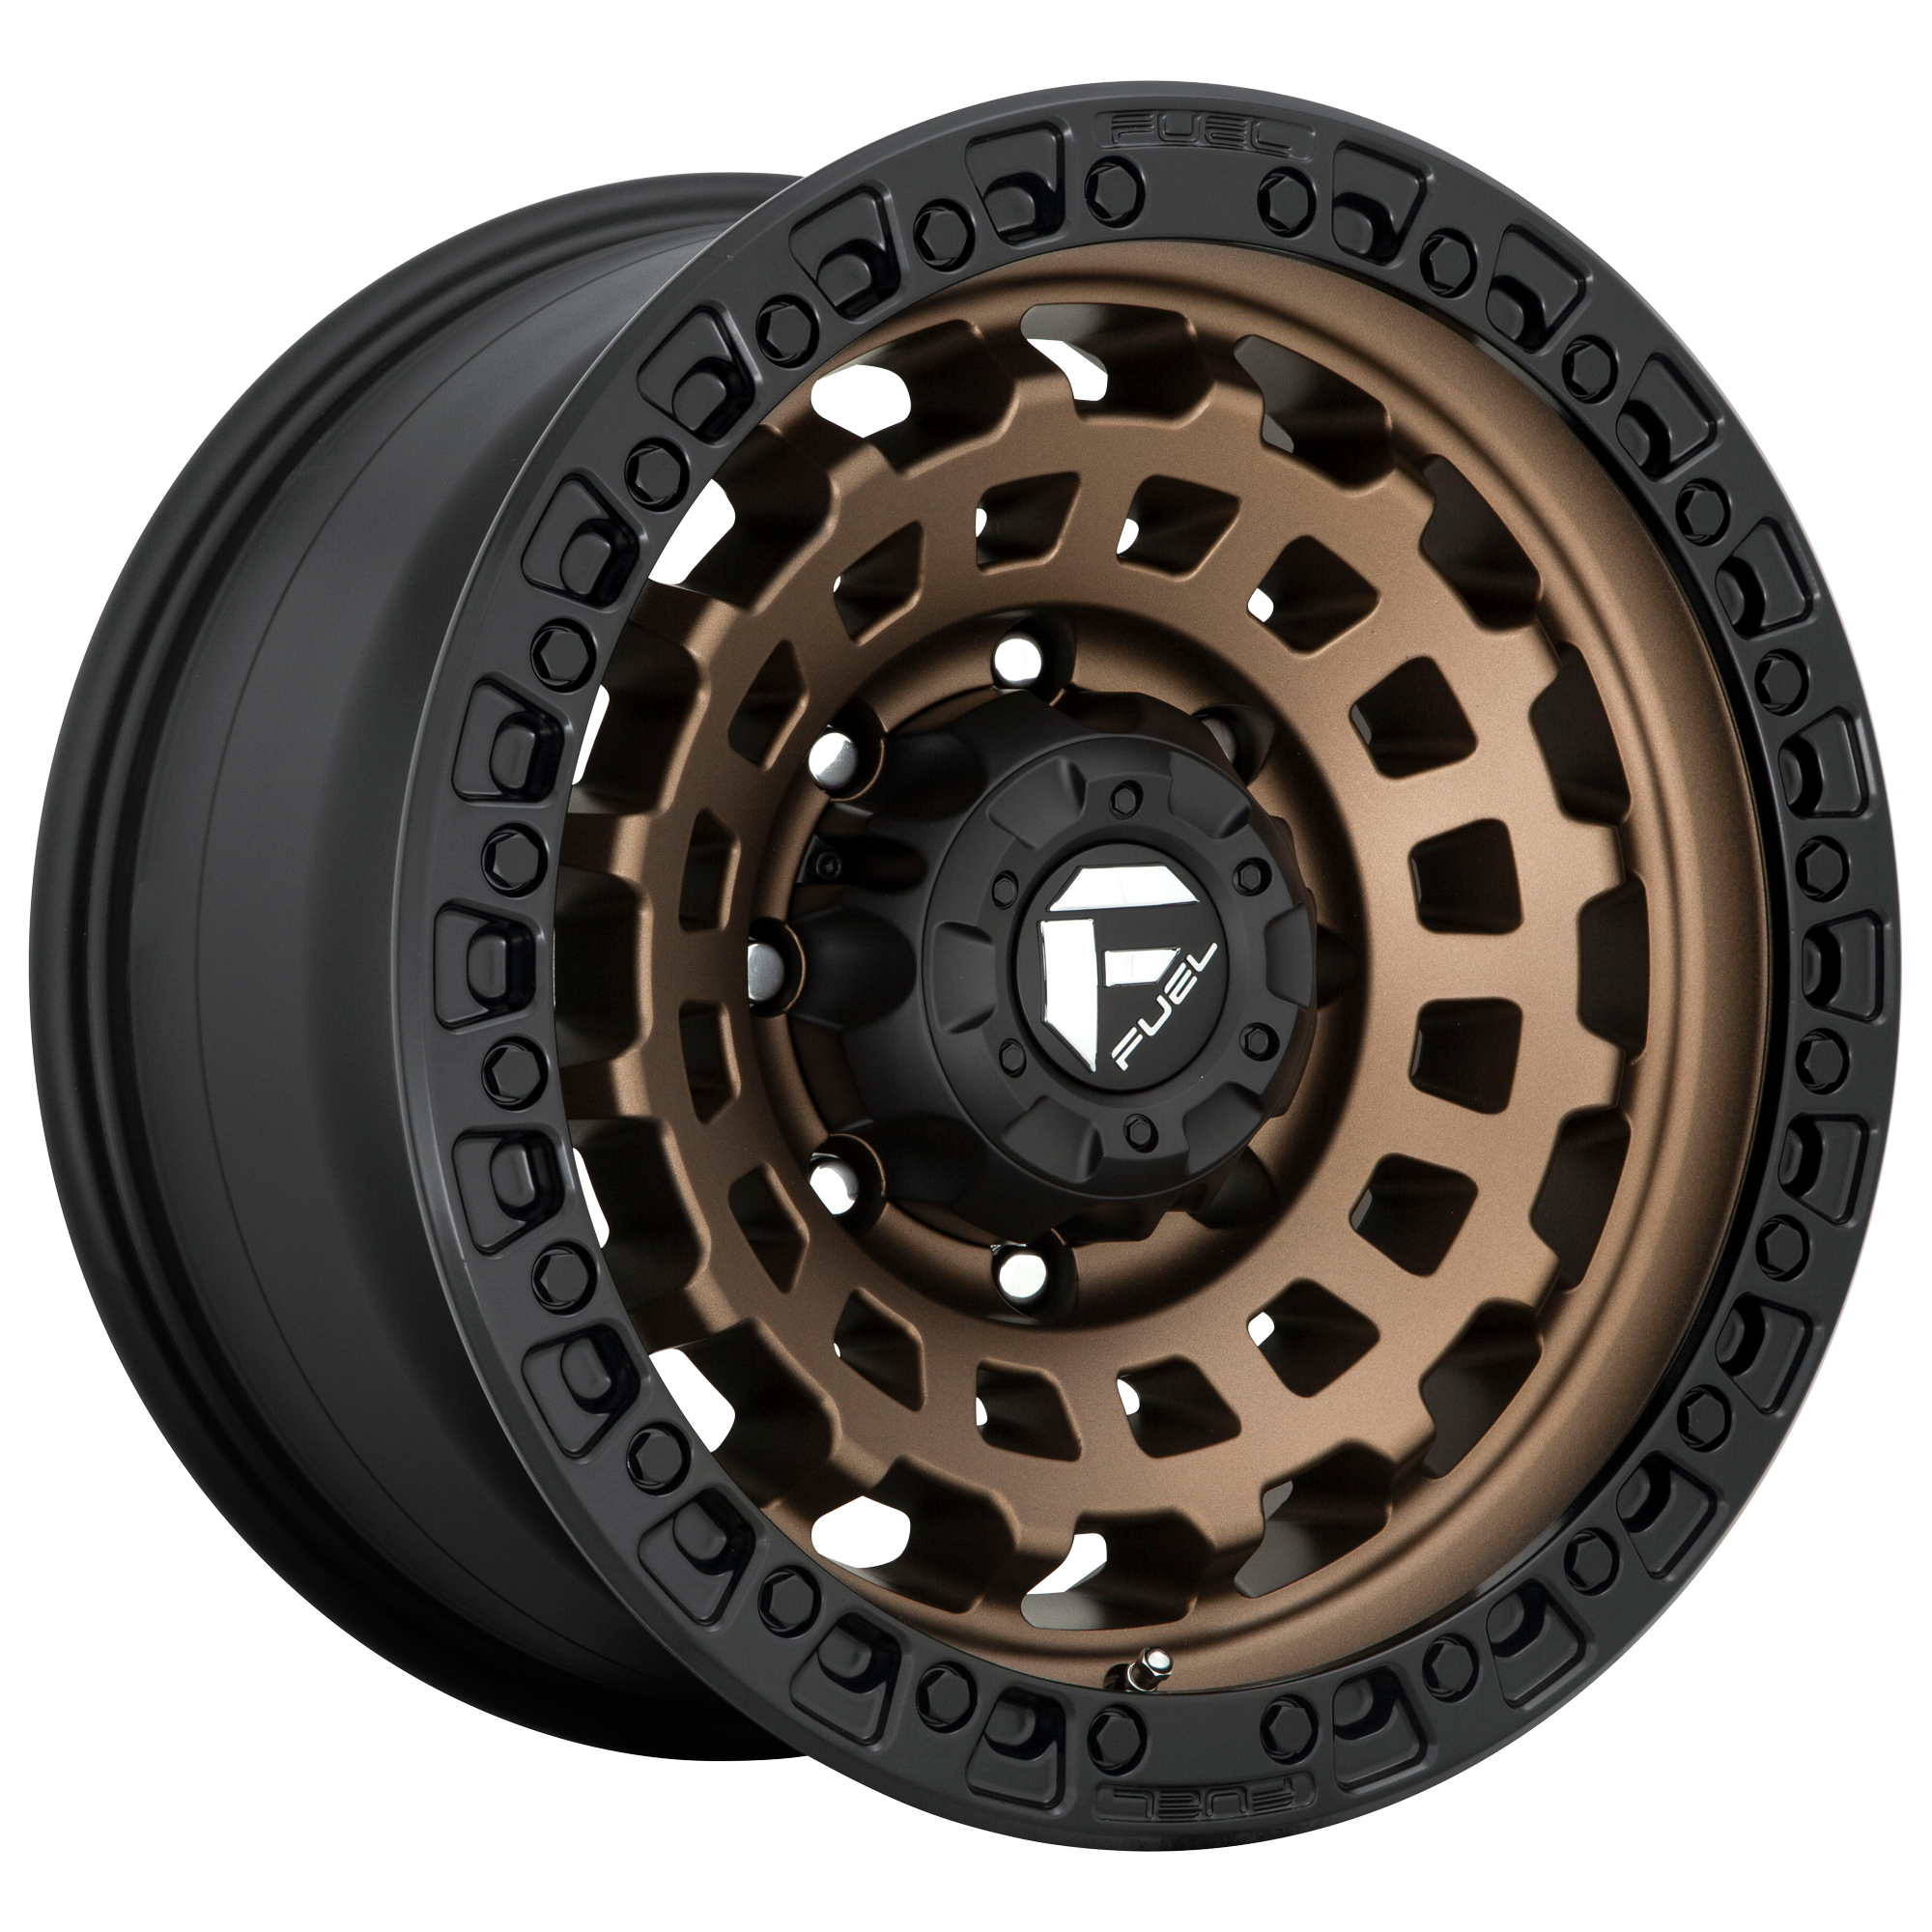 ZEPHYR 20x10 8x180.00 MATTE BRONZE BLACK BEAD RING (-18 mm) - Tires and Engine Performance